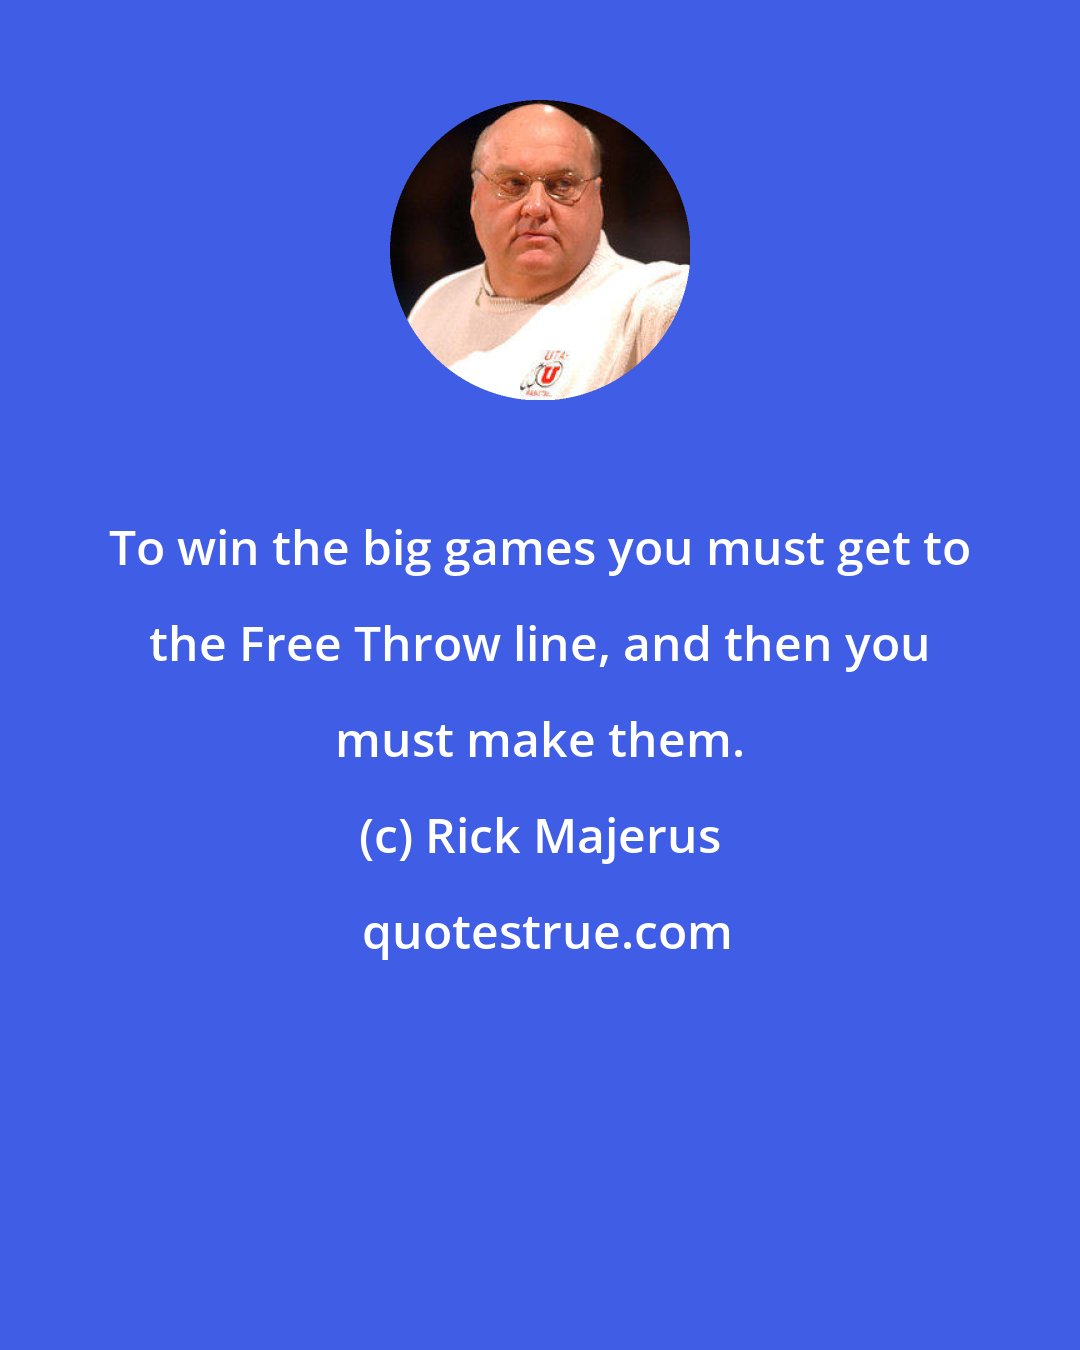 Rick Majerus: To win the big games you must get to the Free Throw line, and then you must make them.